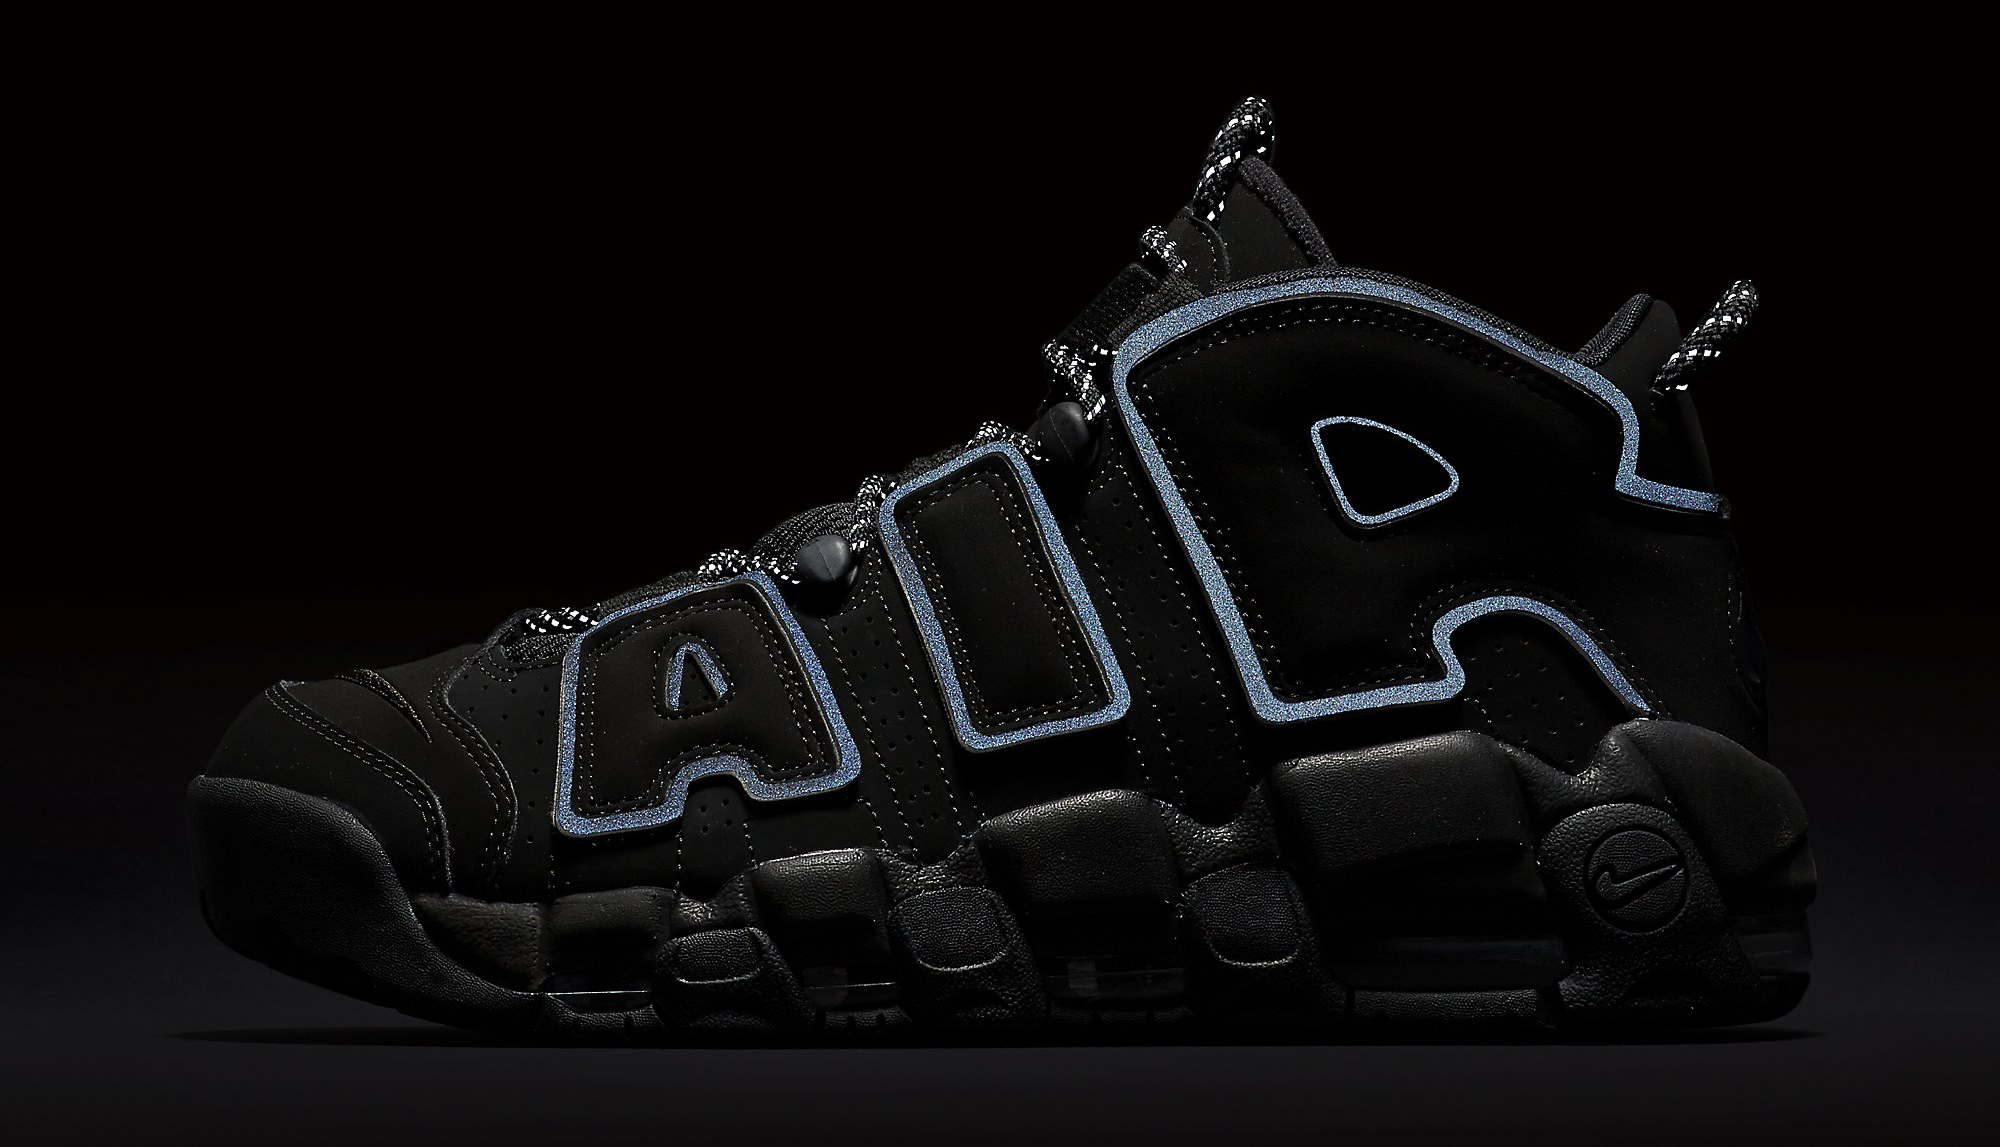 Reflective Air More Uptempos Are Coming Back | Complex